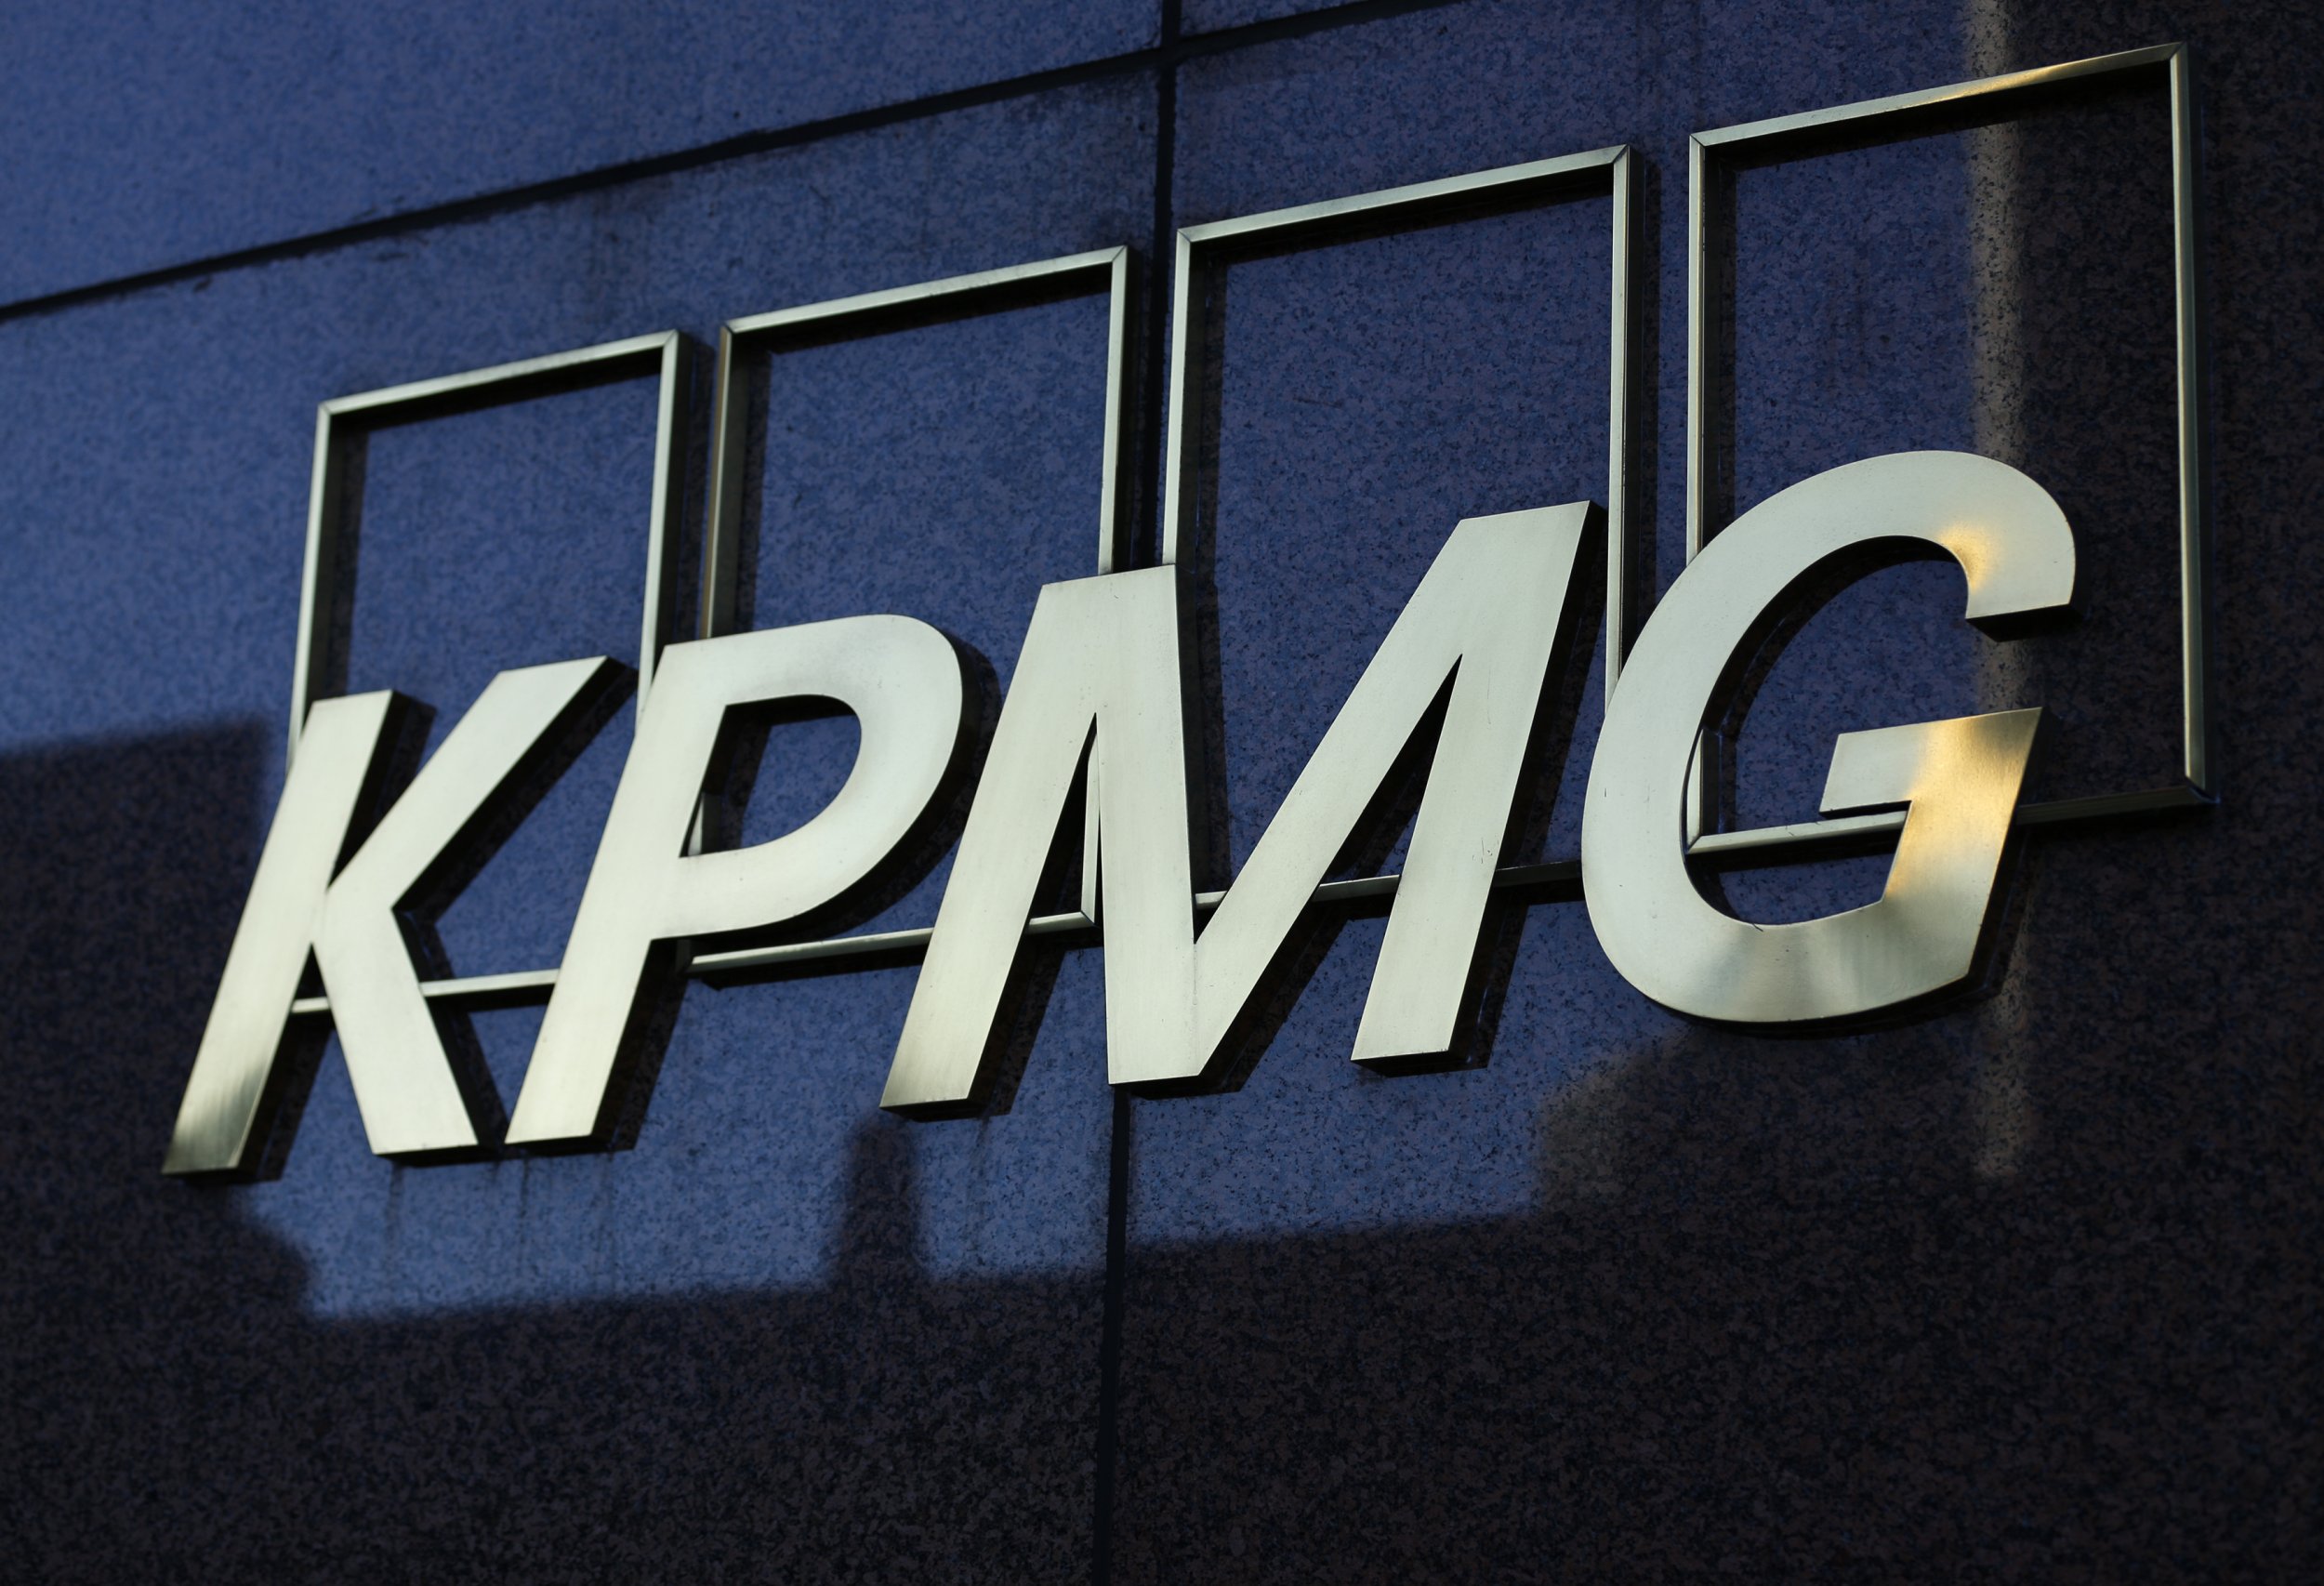 Four Belfast Based Kpmg Partners Arrested On Tax Evasion Charges Including Executive Calling 6613